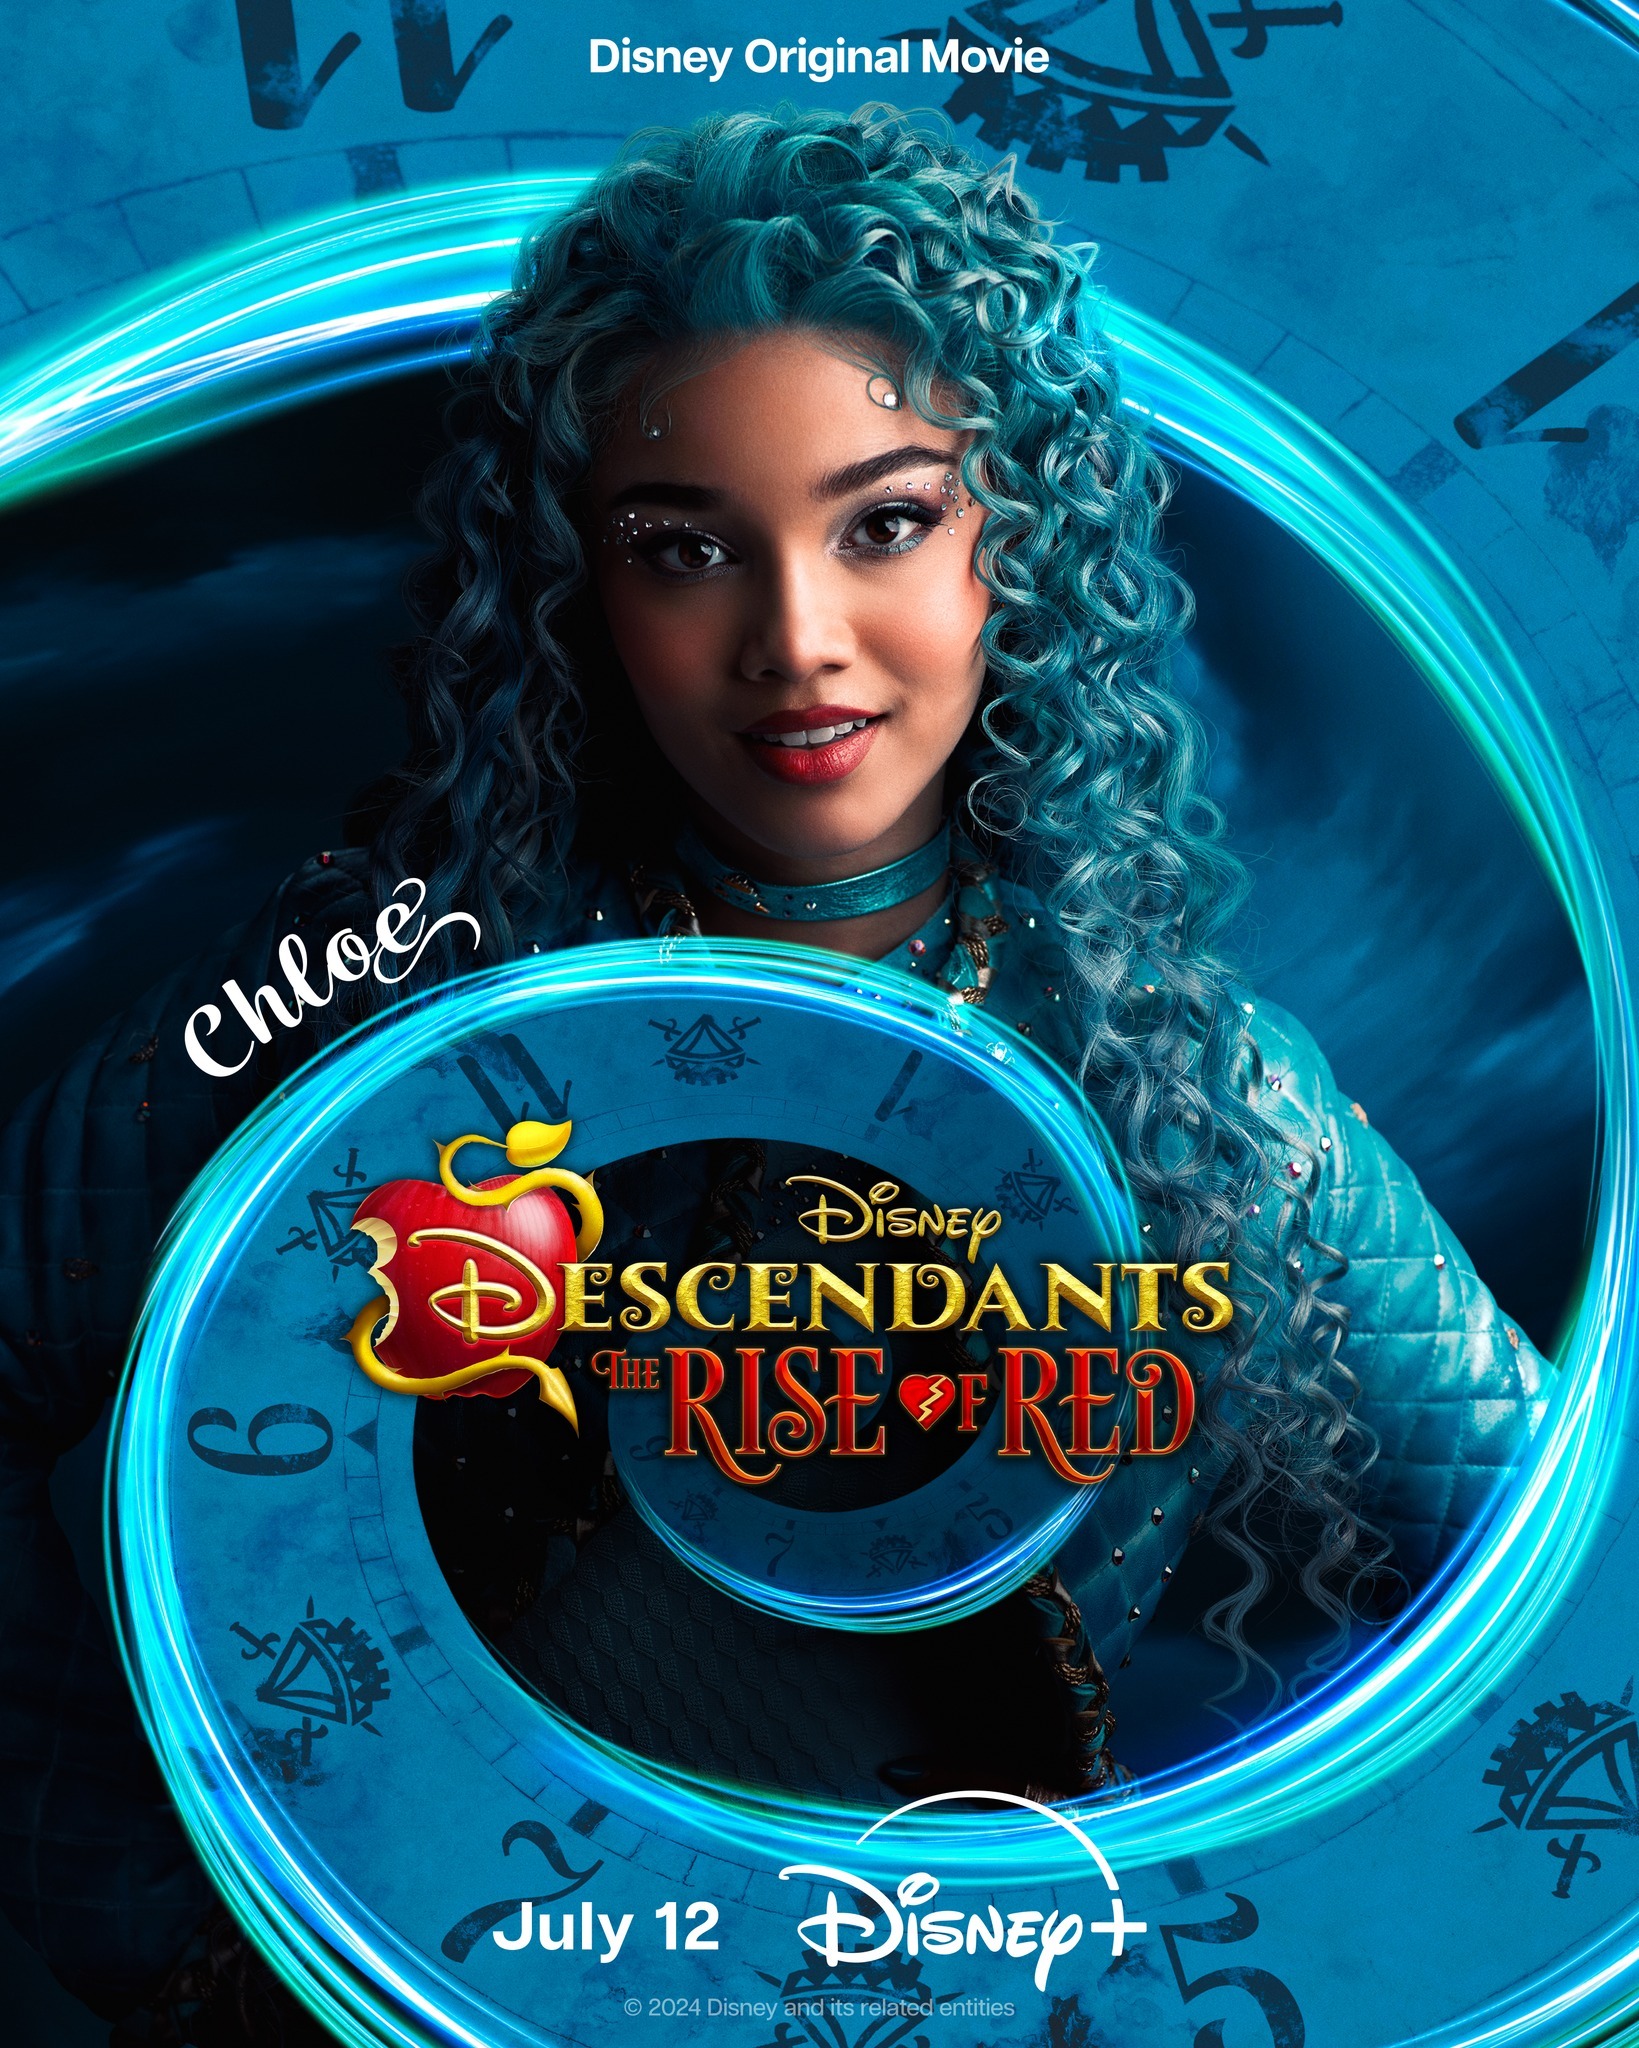 Mega Sized Movie Poster Image for Descendants: The Rise of Red (#10 of 13)